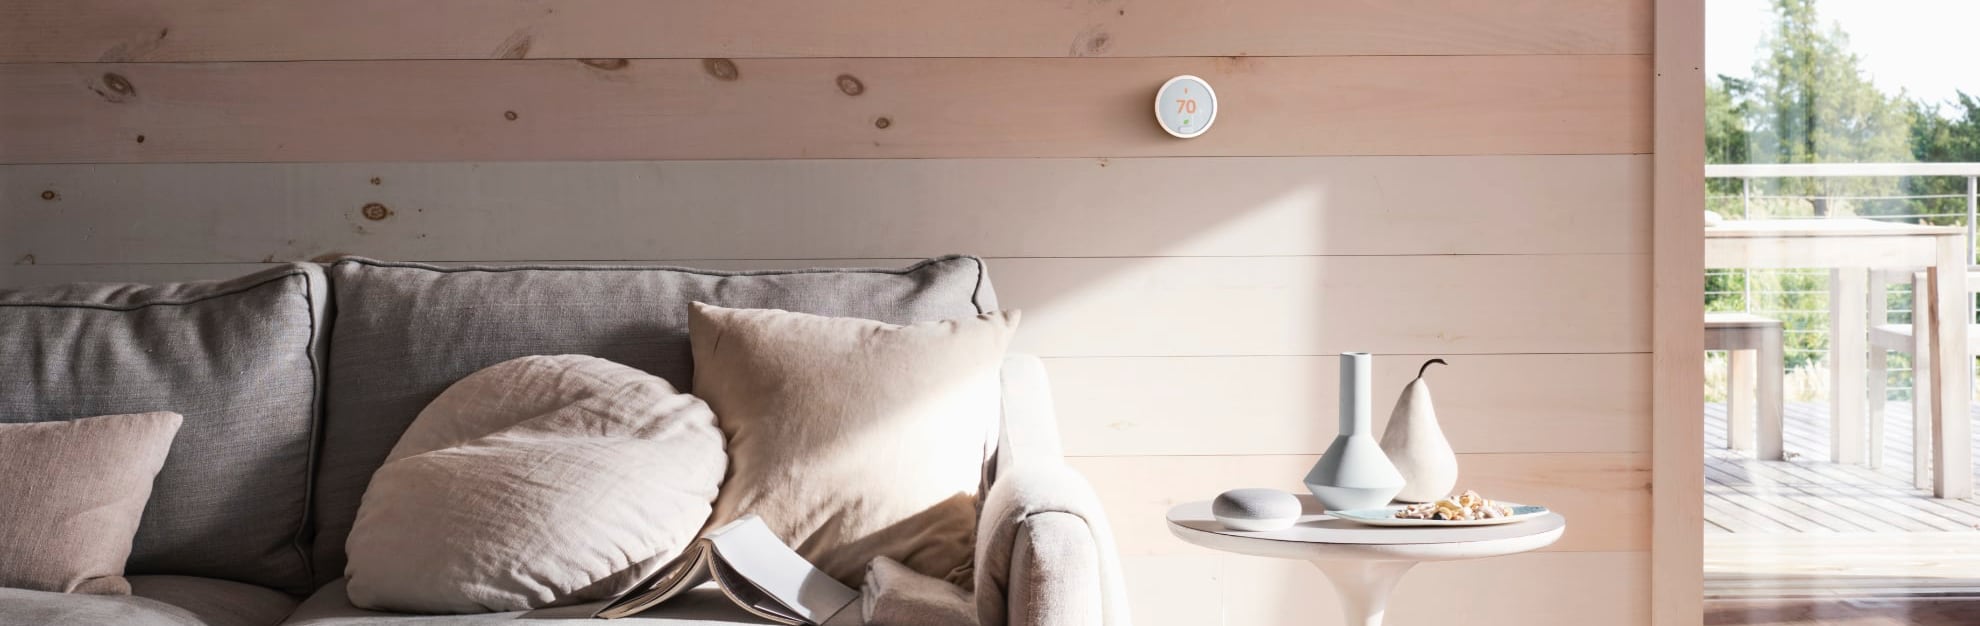 Vivint Home Automation in Syracuse